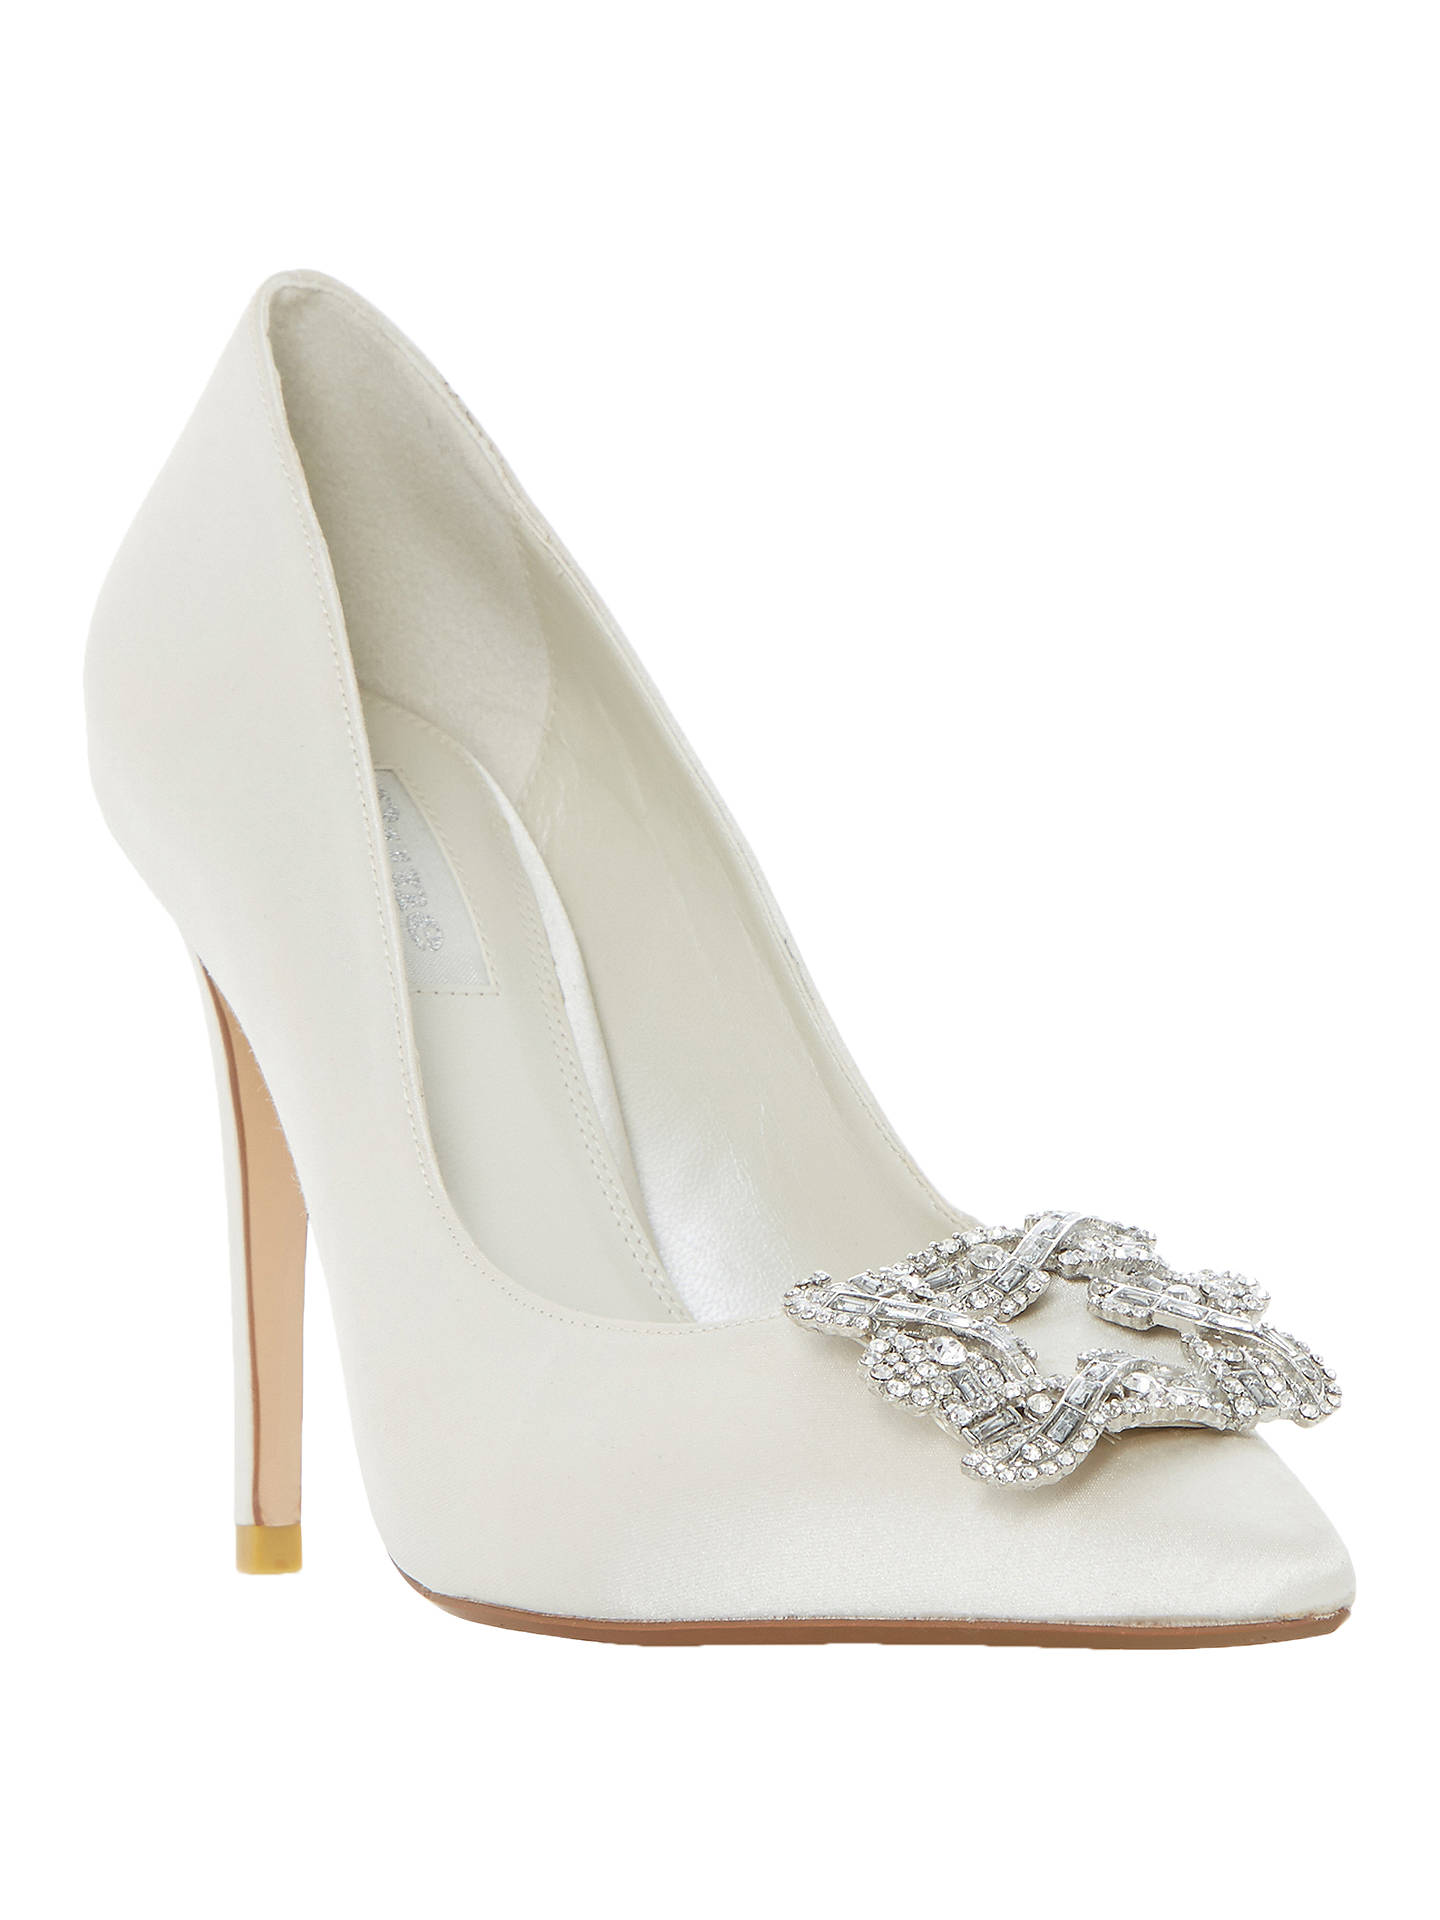 Dune Bridal Collection Breanna Jewel Stiletto Court Shoes, Ivory Satin ...